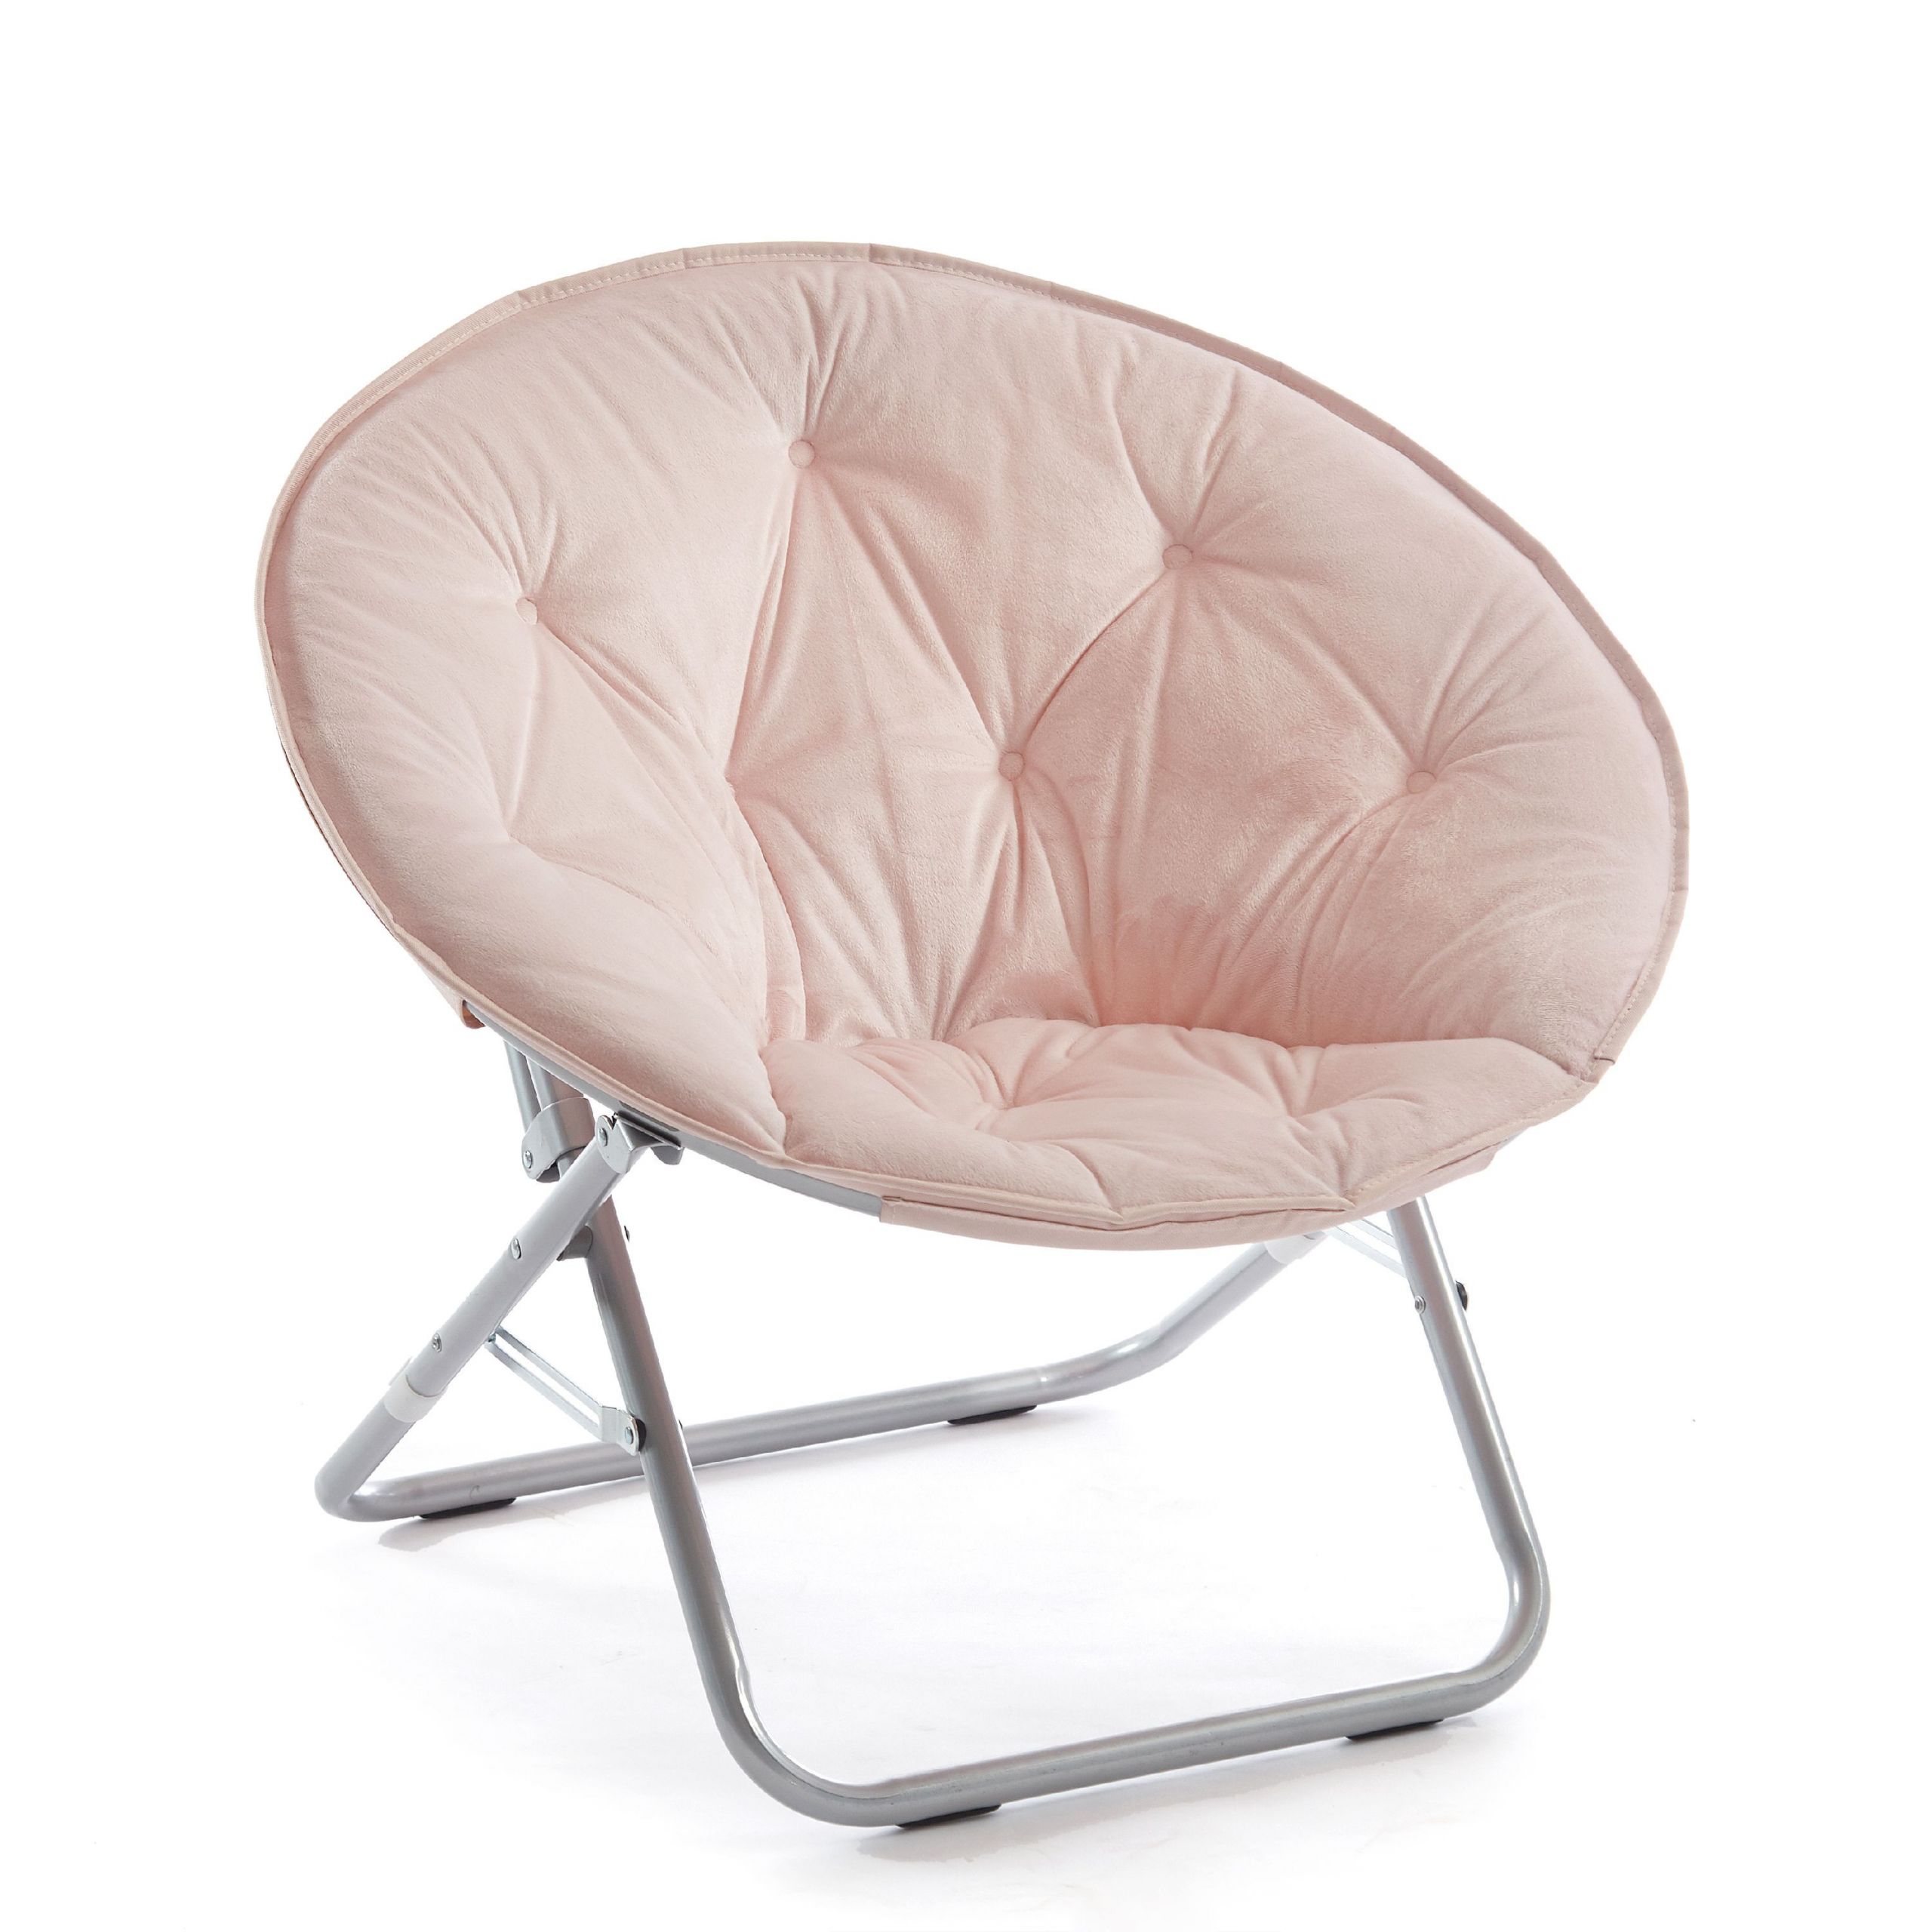 Kids Saucer Chair
 Urban Shop Kids Micromink Saucer Chair Available in